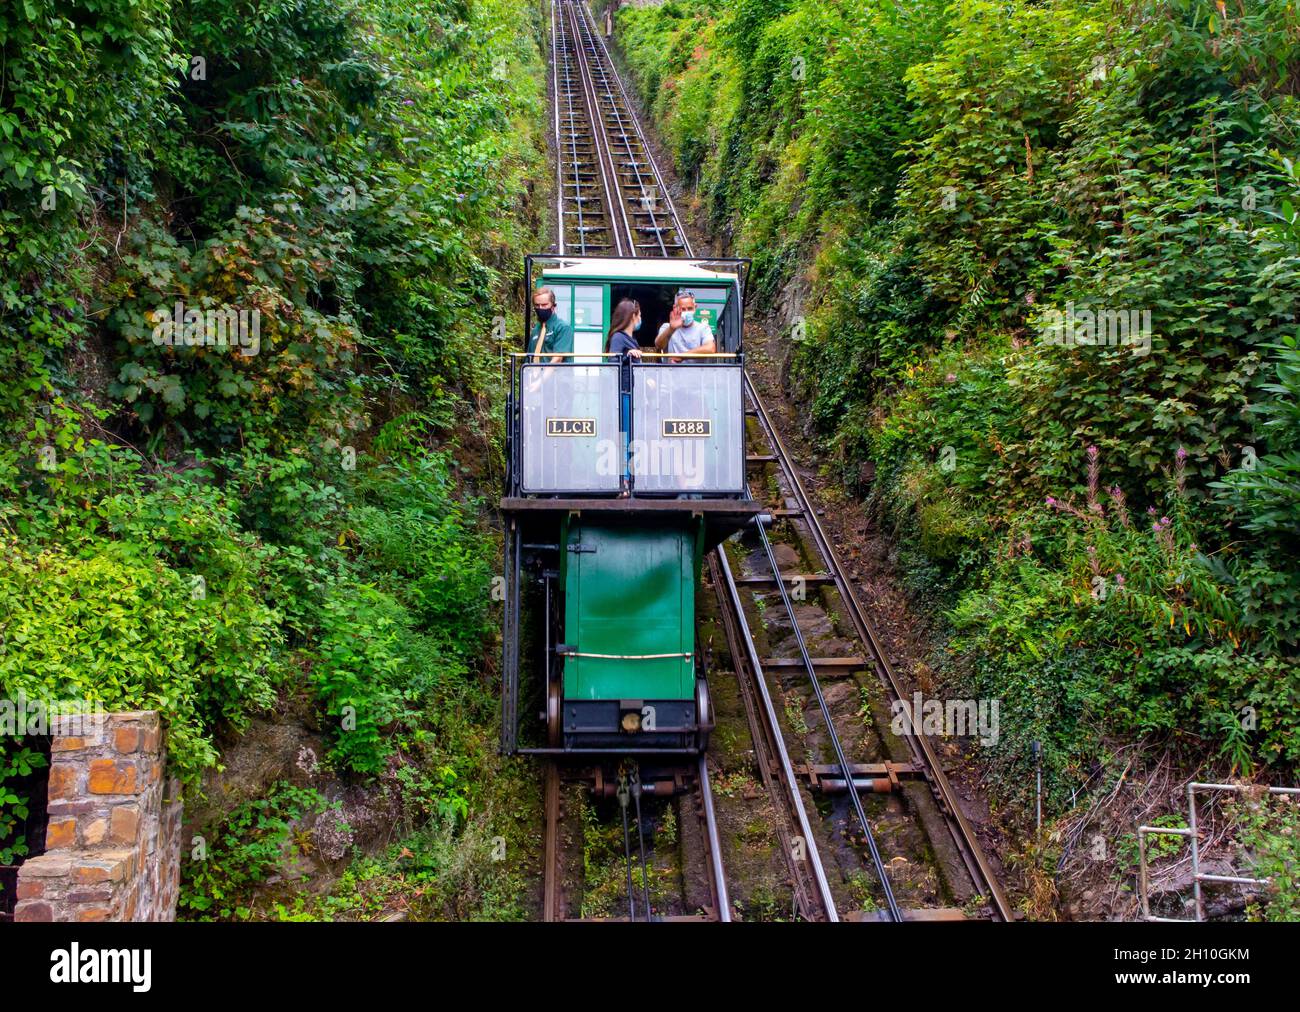 The Lynton and Lynmouth Cliff Railway a water powered funicular railway joining the towns of Lynton and Lynmouth in North Devon England UK since 1890. Stock Photo